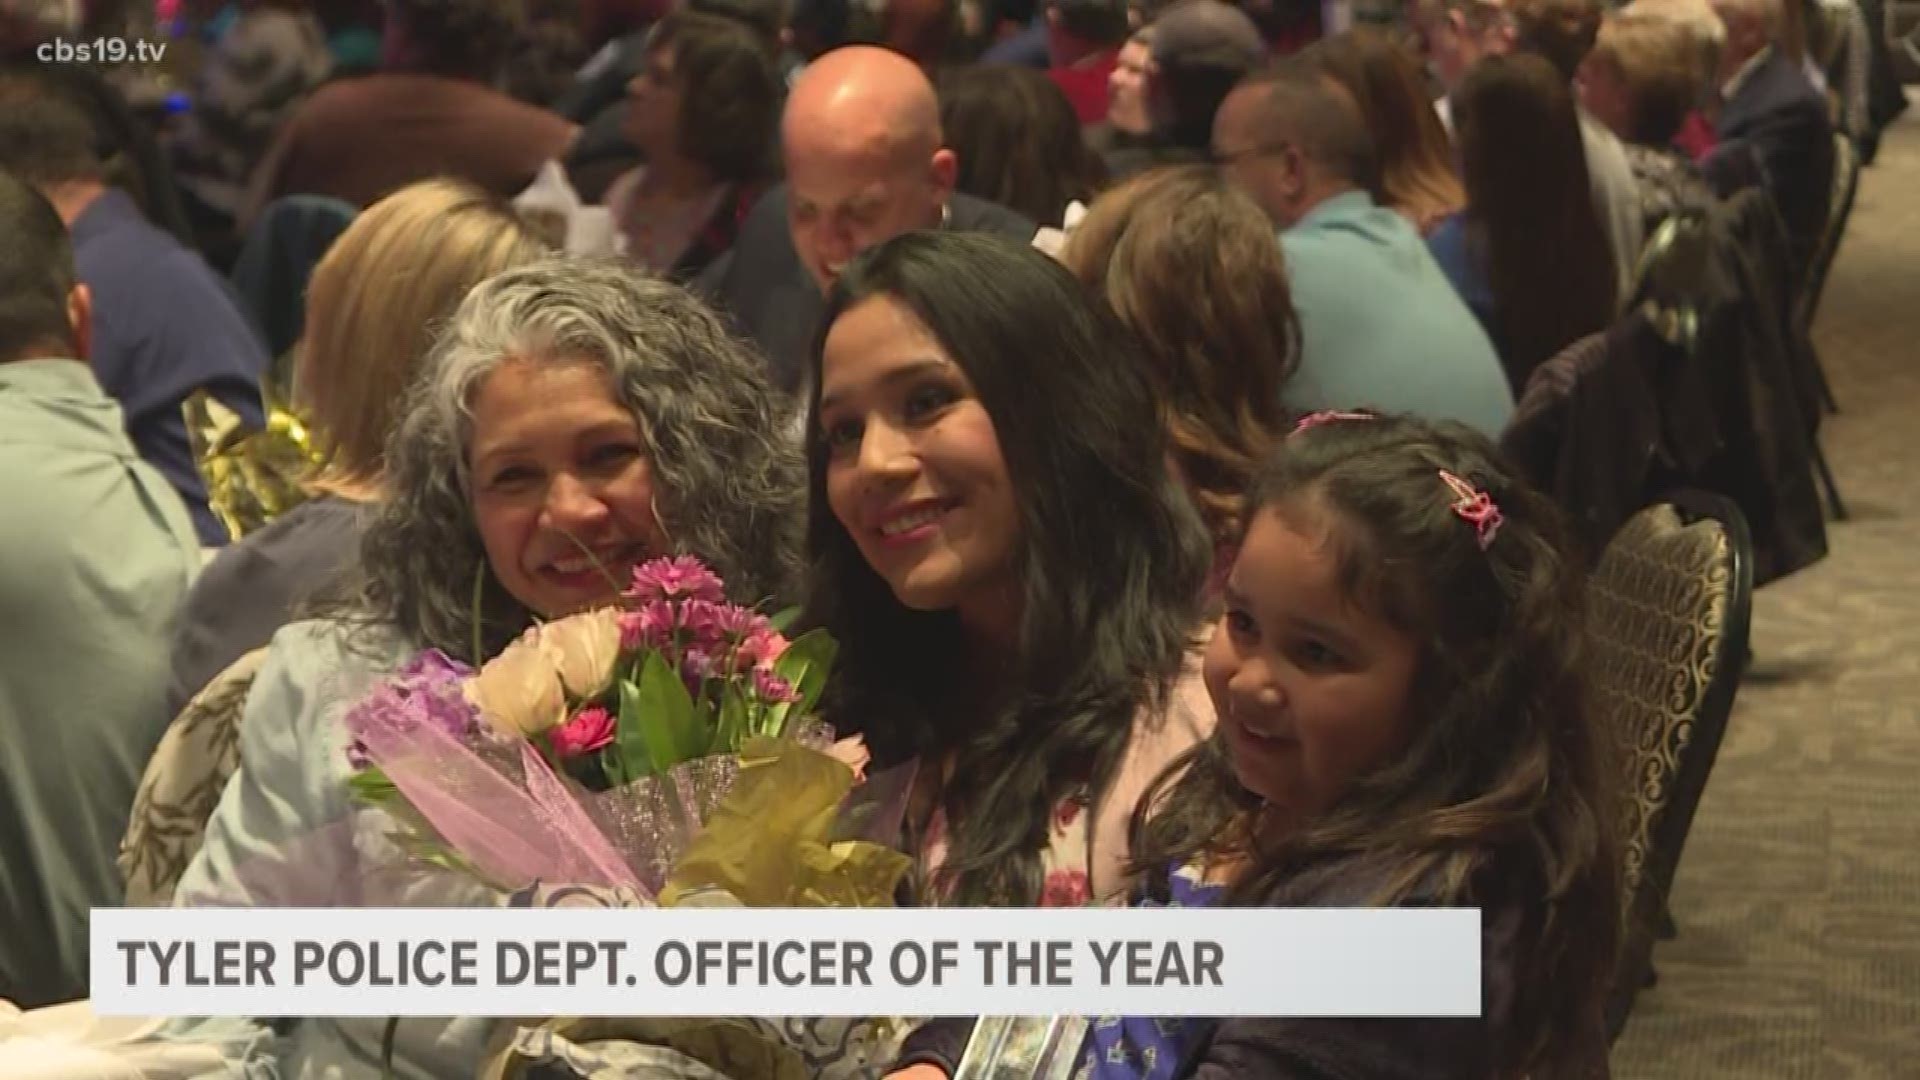 The Tyler Police Department hosted its annual awards banquet and awarded one member as officer of the year.